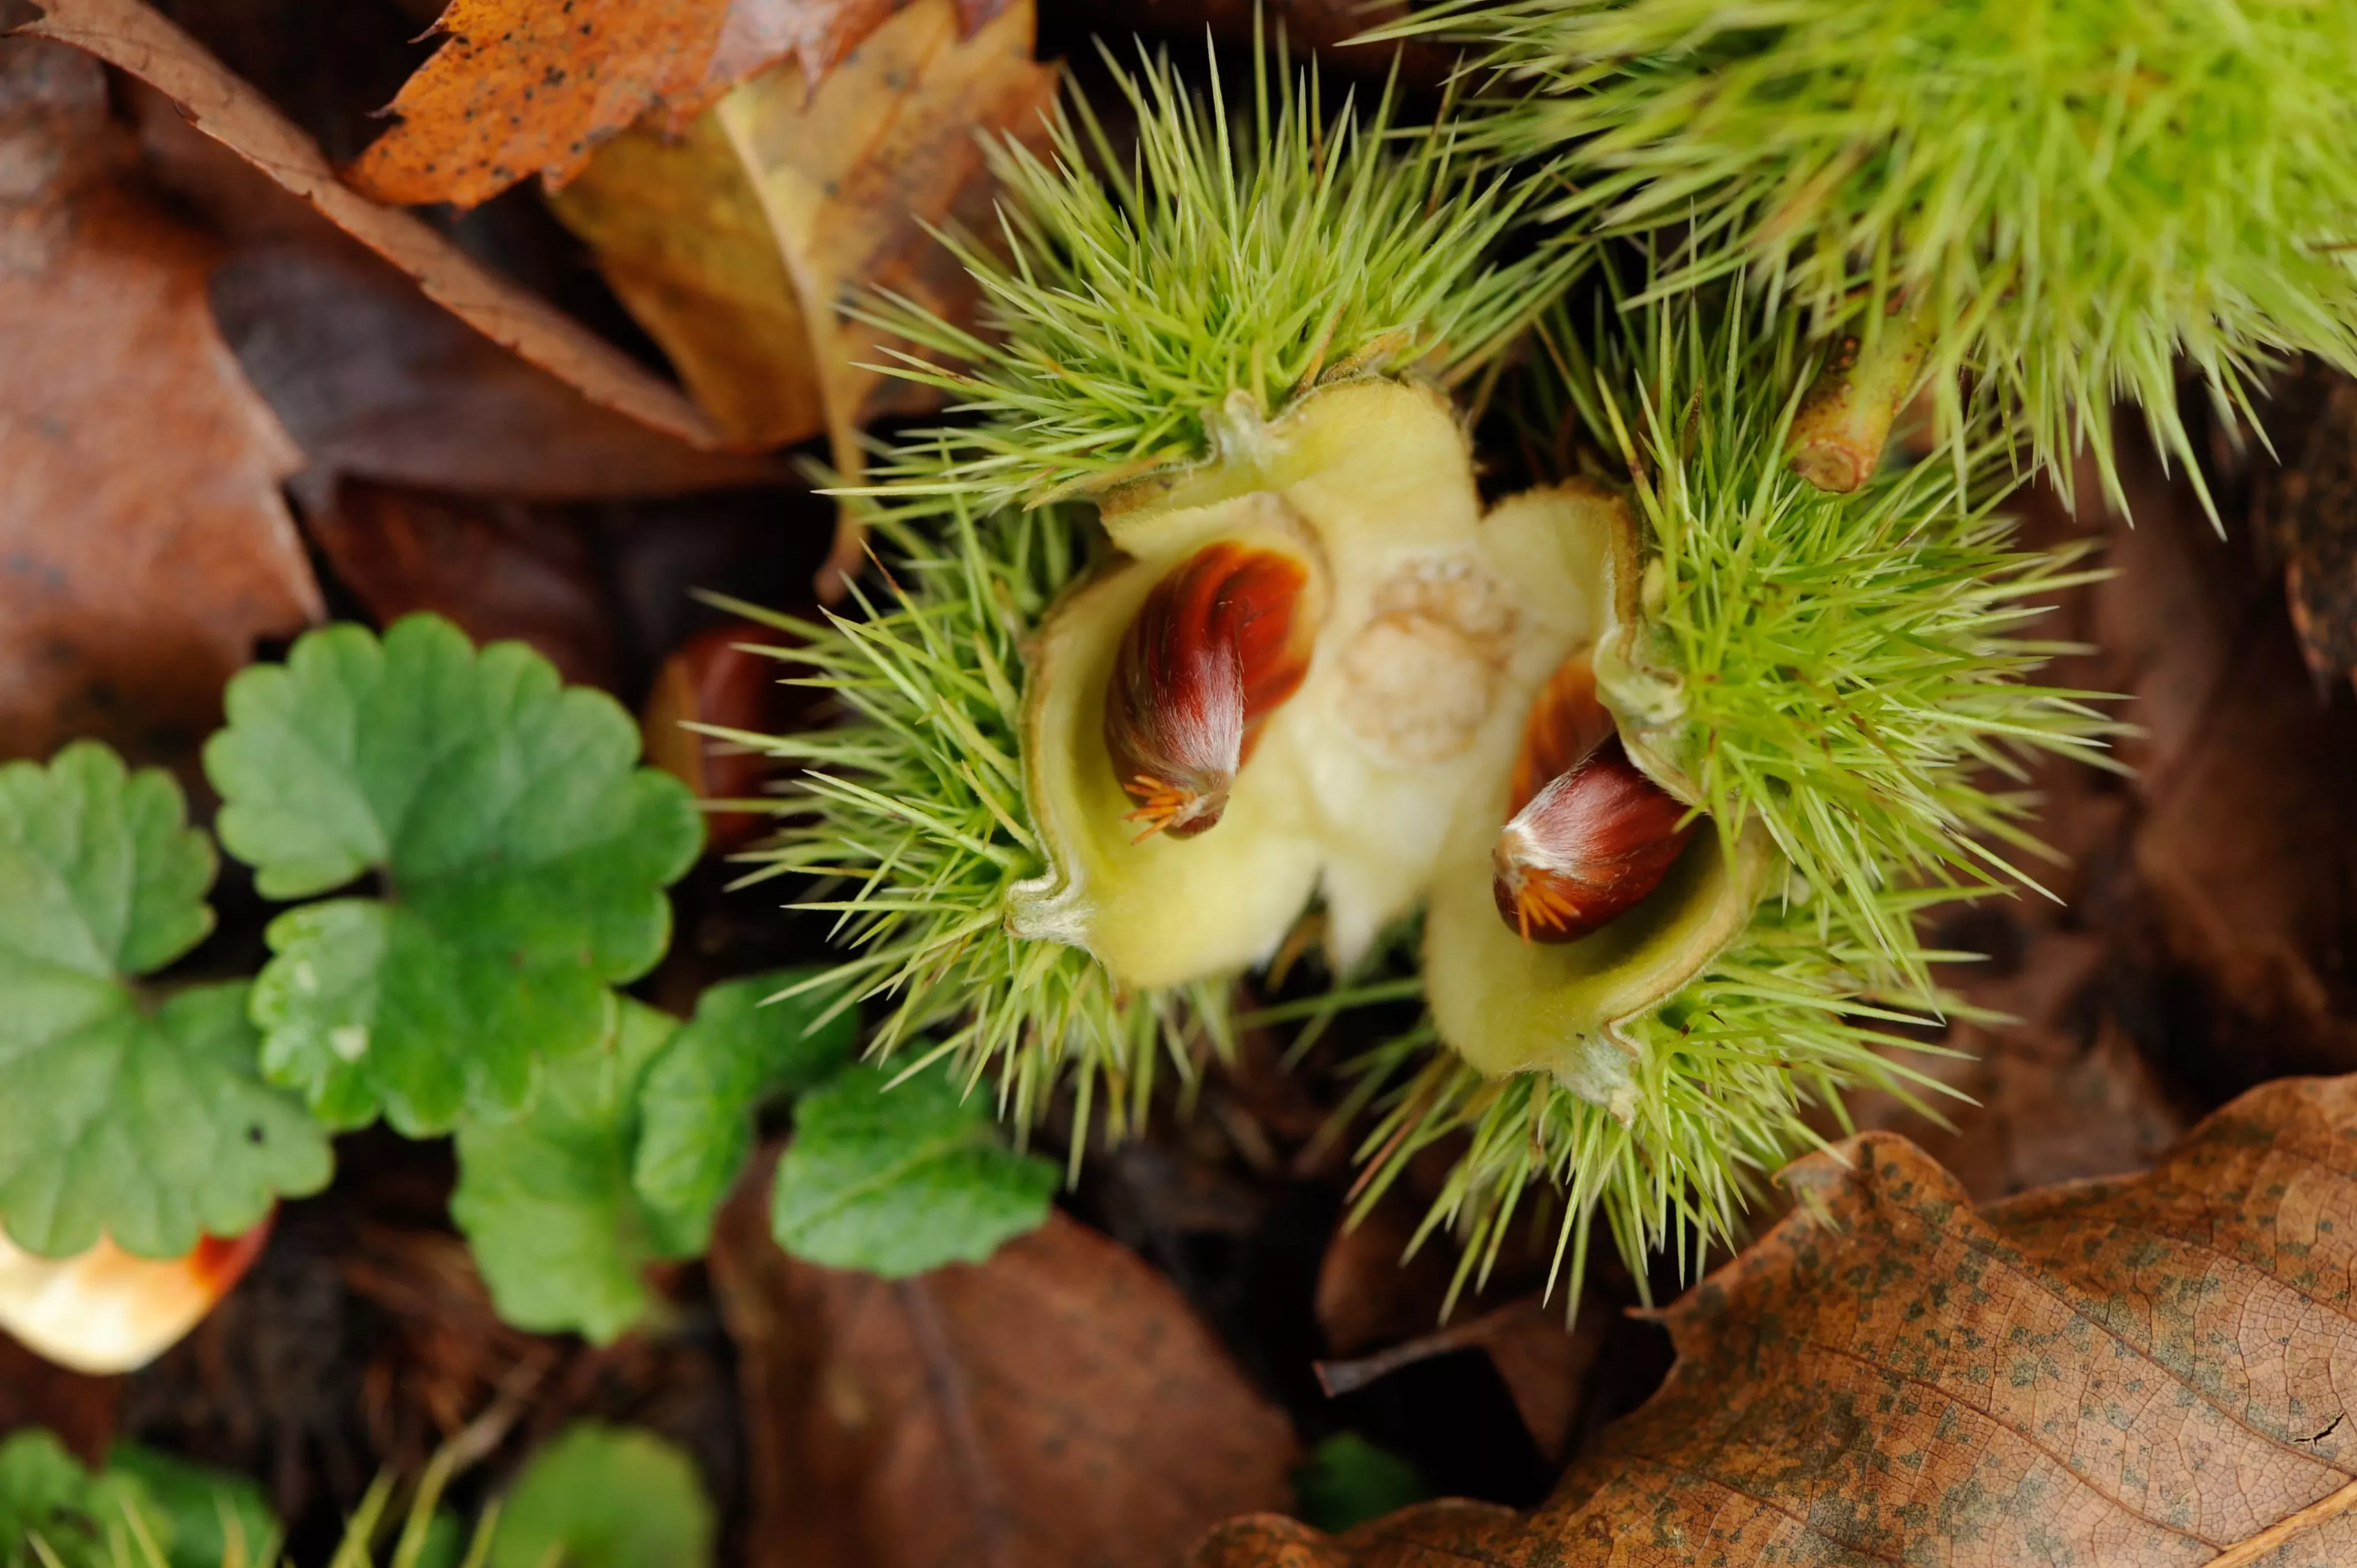 A sweet chestnut bursting from its casing on the forest floor